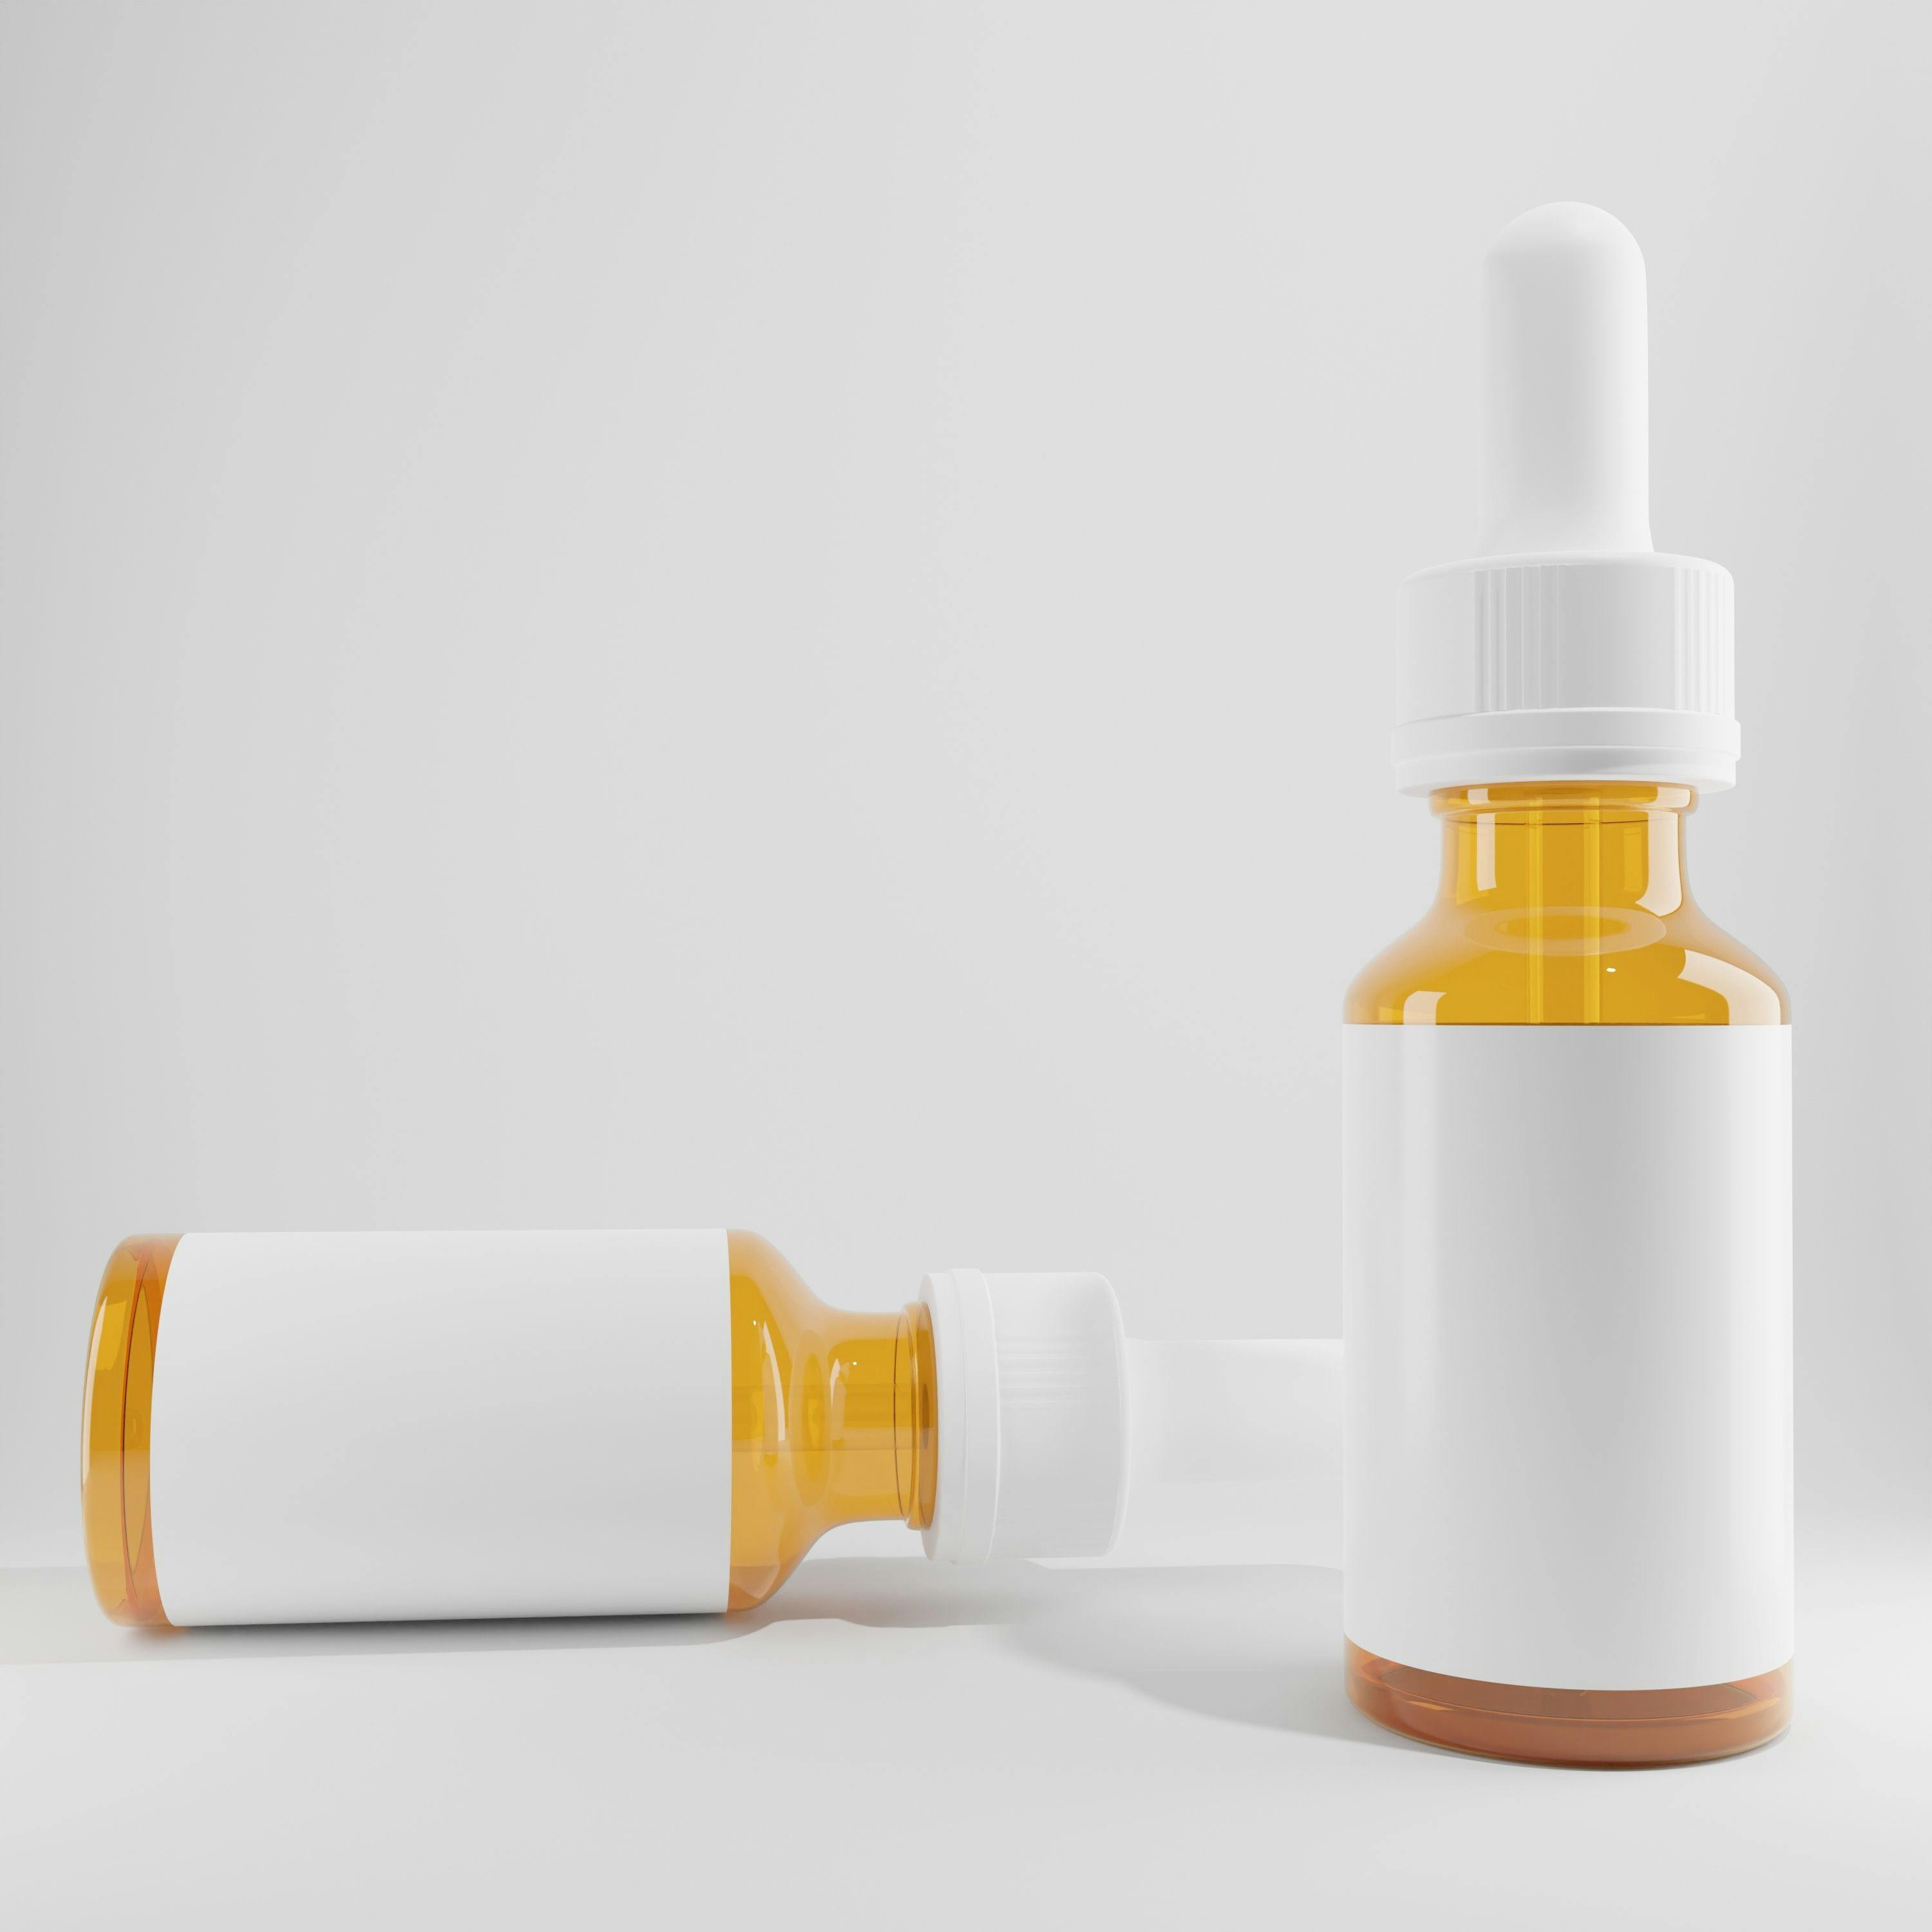 two glass cosmetic bottles dropper with a blank label and white lid a front view 3d render  | Image credit: Josephait - stock.adobe.com